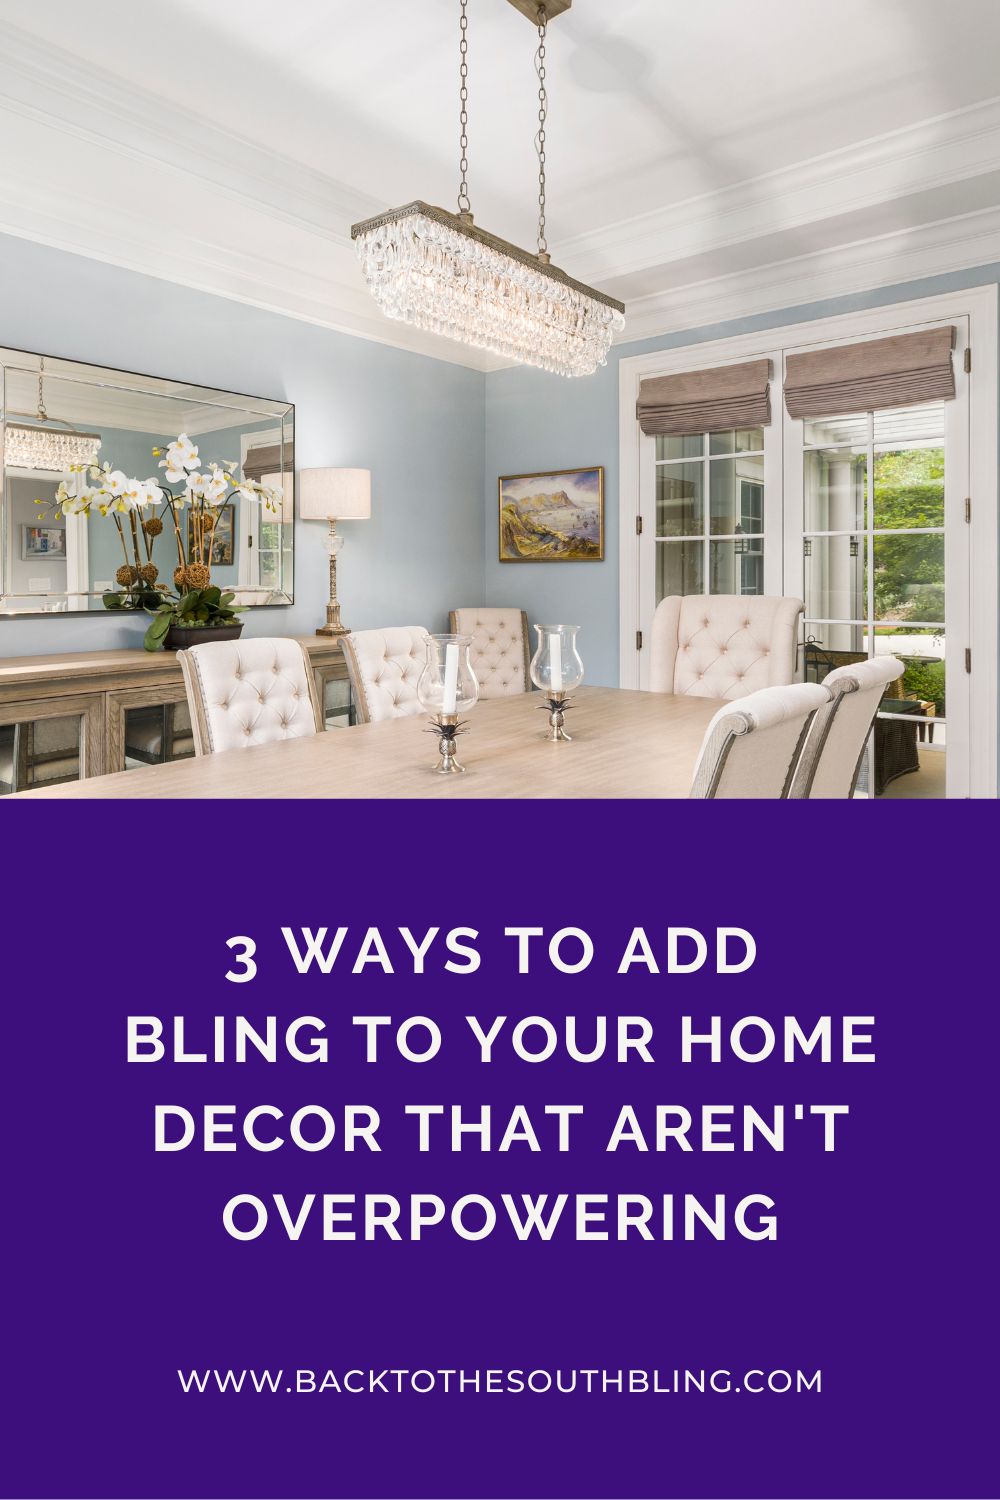 3 Ways to Add Bling to Your Home Decor That Aren't Overpowering